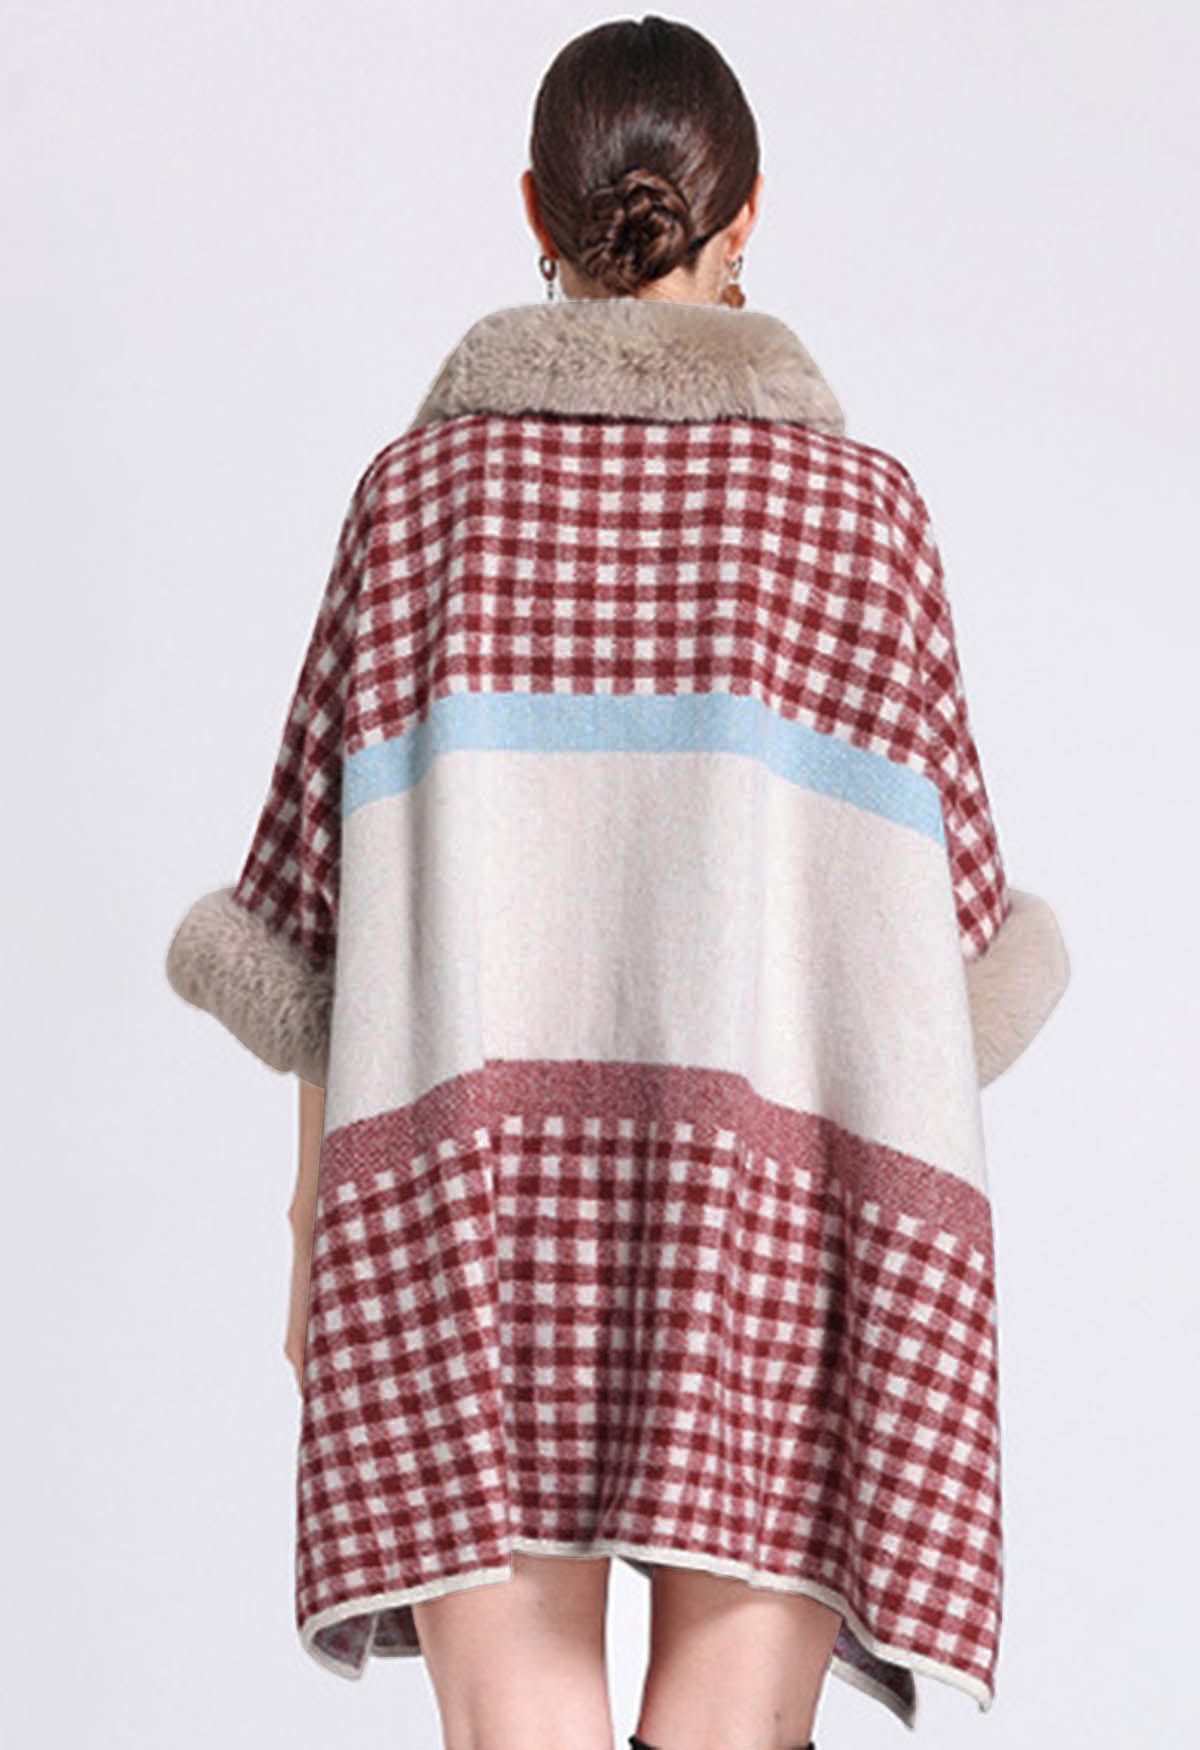 Gingham Print Faux Fur Poncho in Red